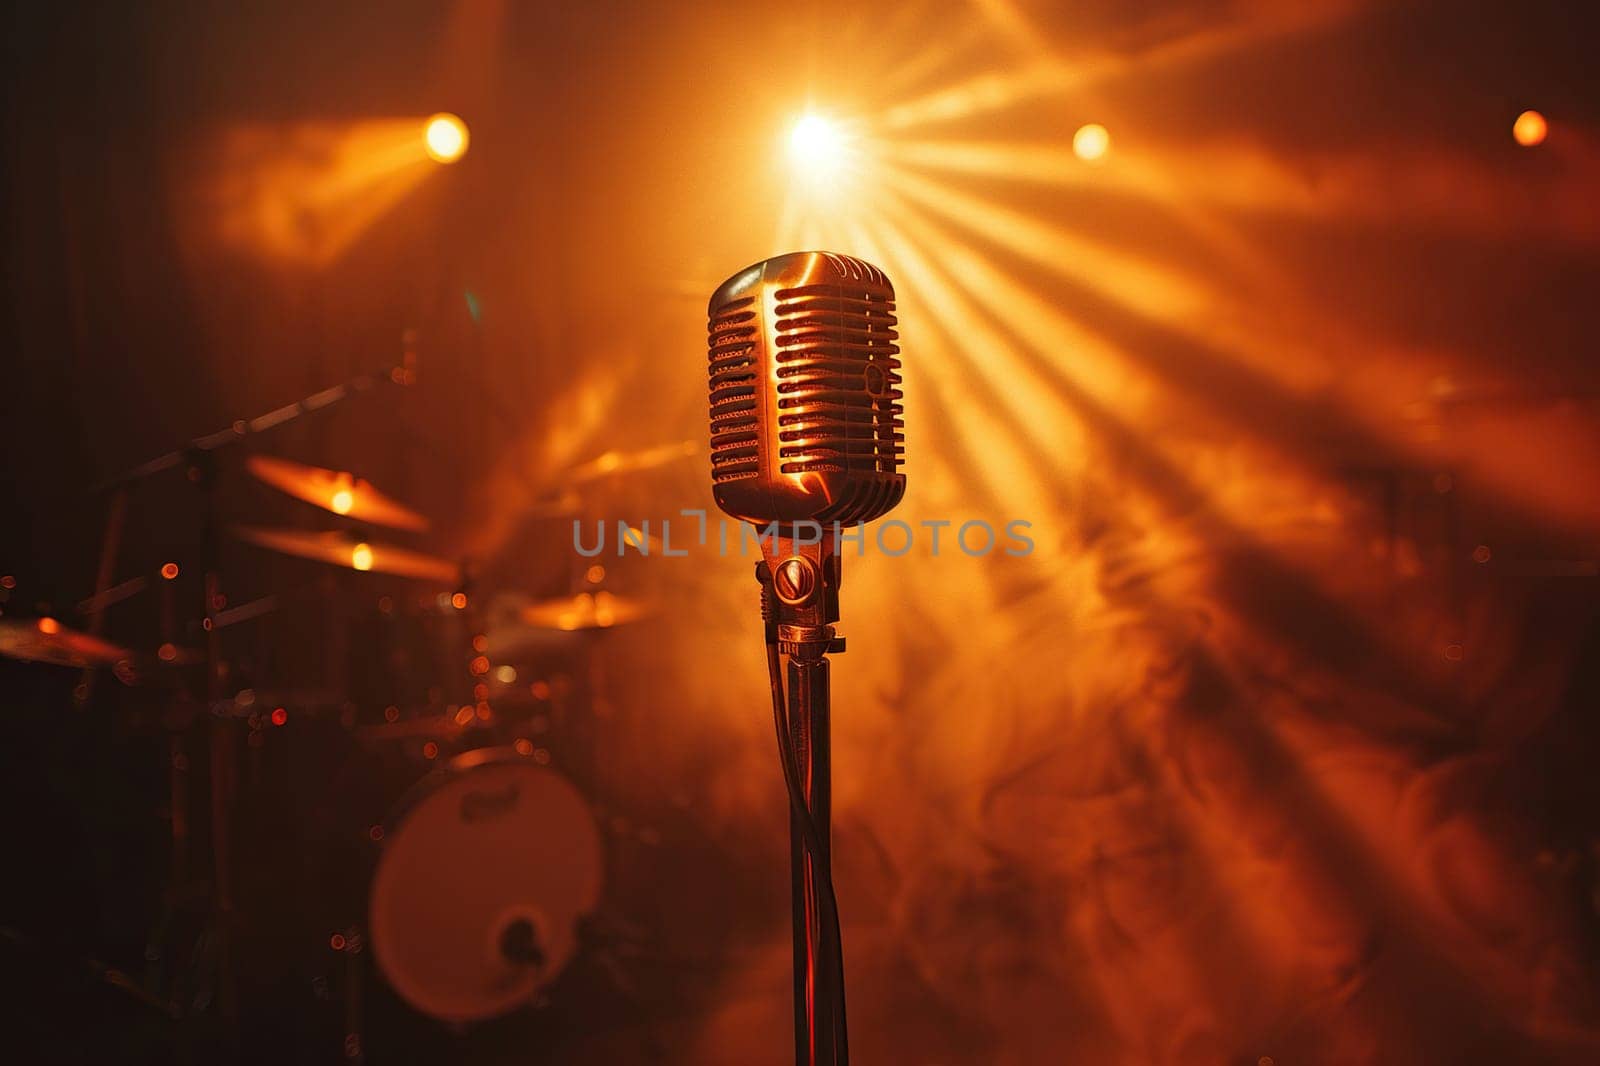 Concert stage with a microphone in the light of spotlights. Performance by Vovmar